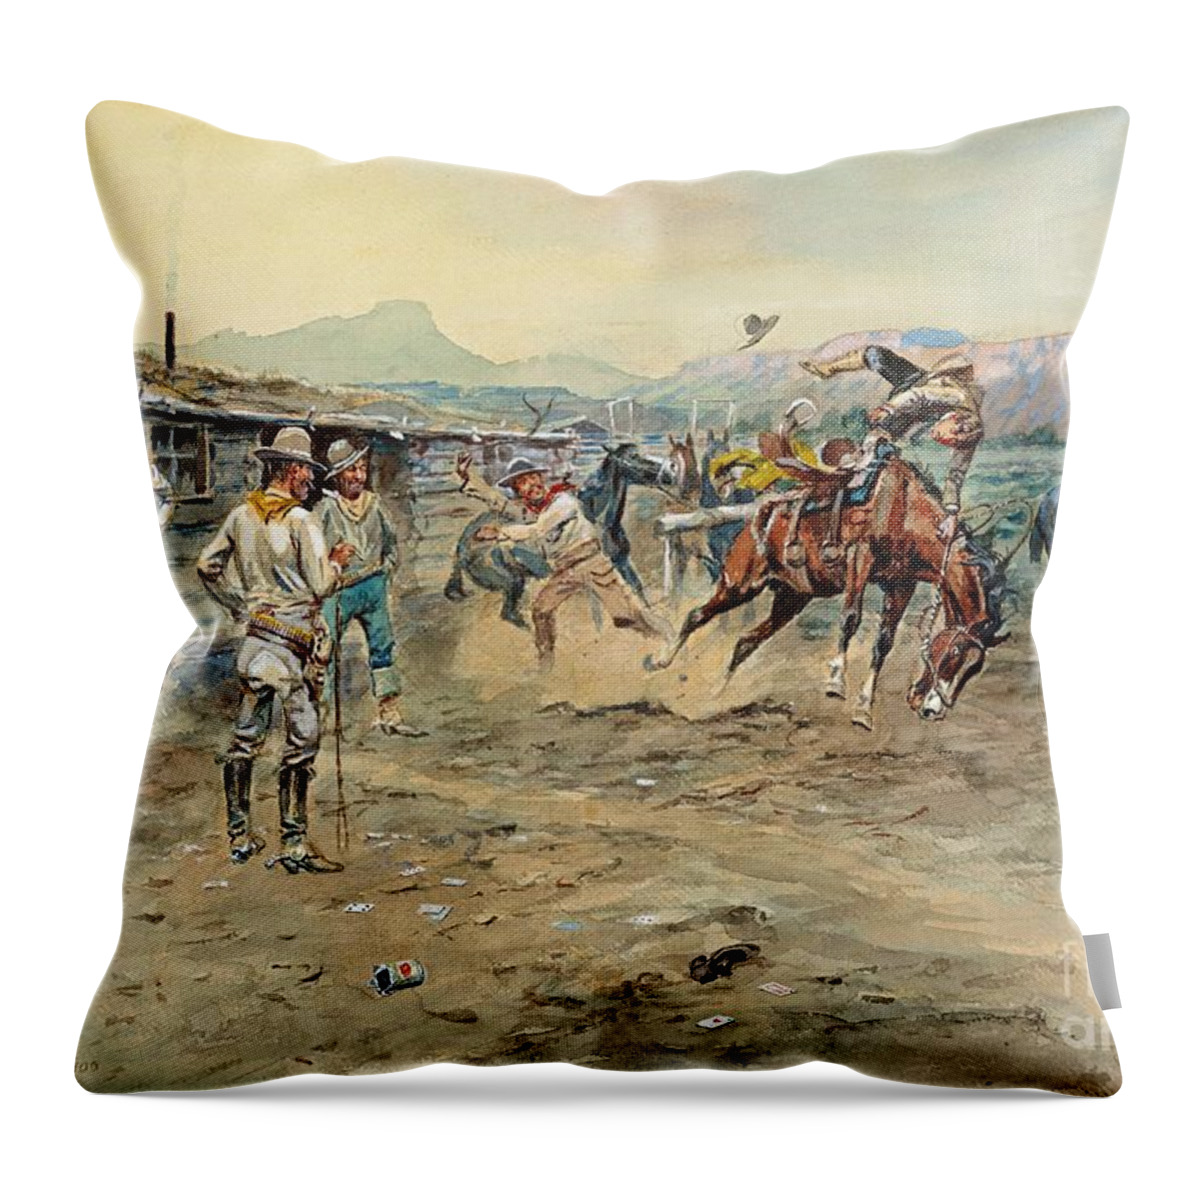 Pd: Reproduction Throw Pillow featuring the painting The Tenderfoot by Thea Recuerdo